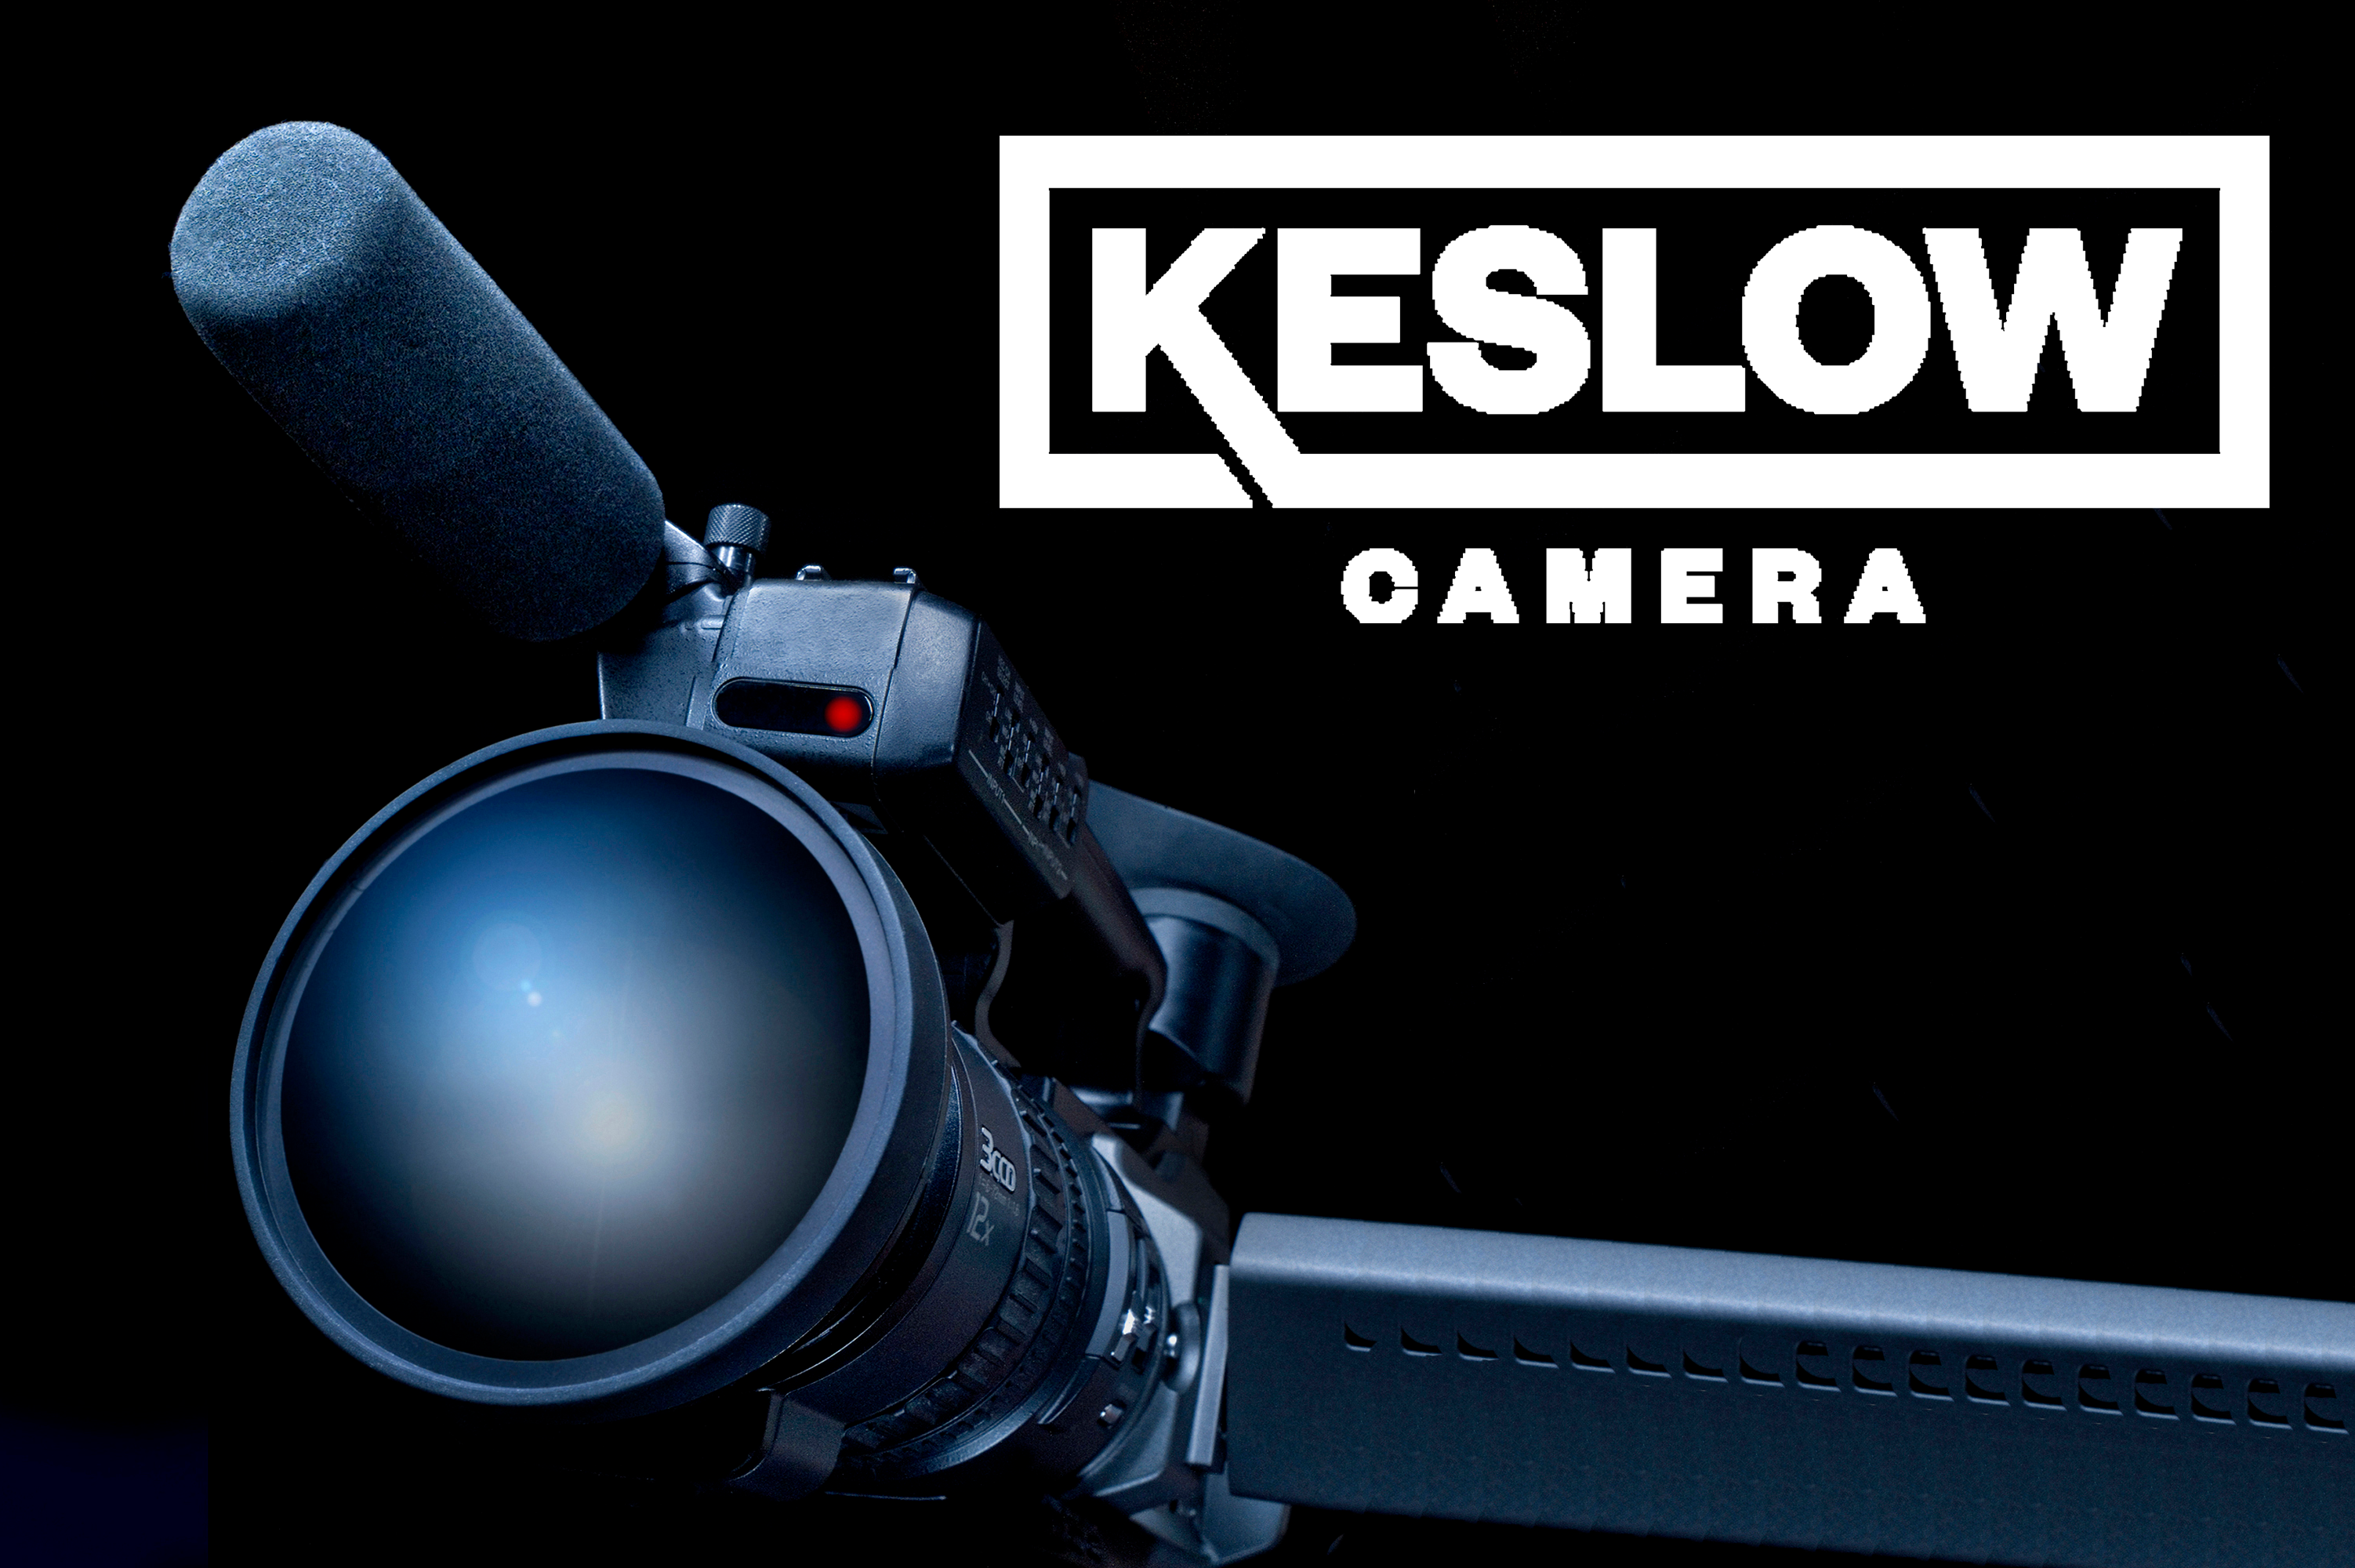 Liquidation Sale Conducted for Surplus Keslow Cinematography Rental Gear